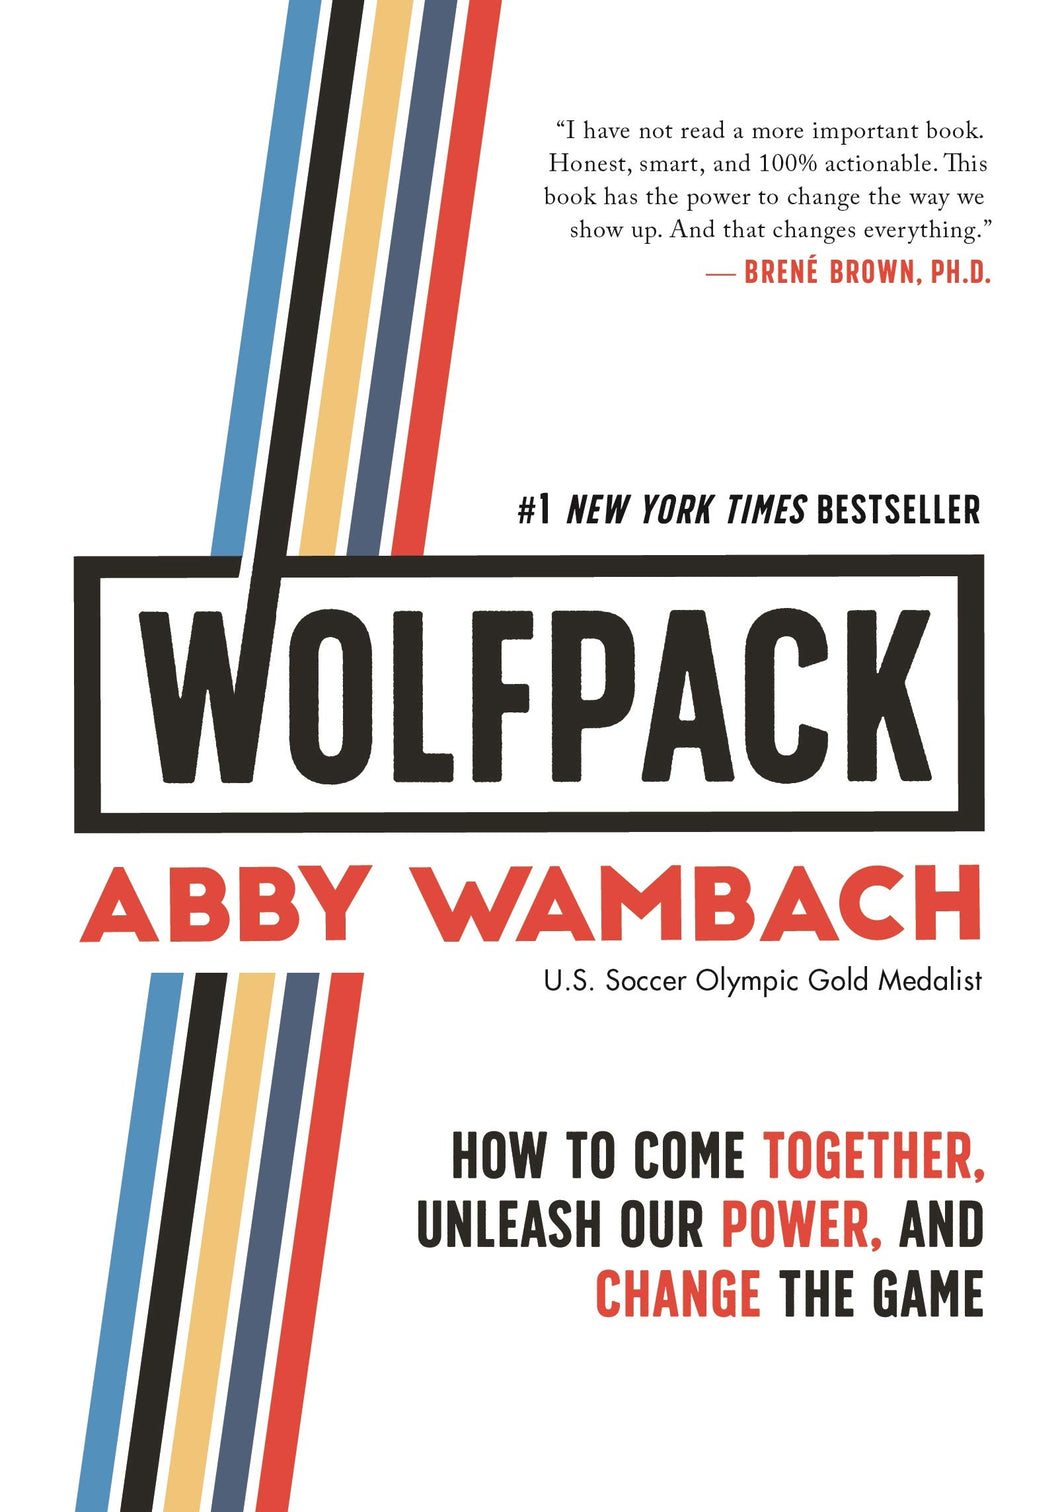 Wolfpack: How to Come Together, Unleash Our Power, and Change the Game [Abby Wambach]